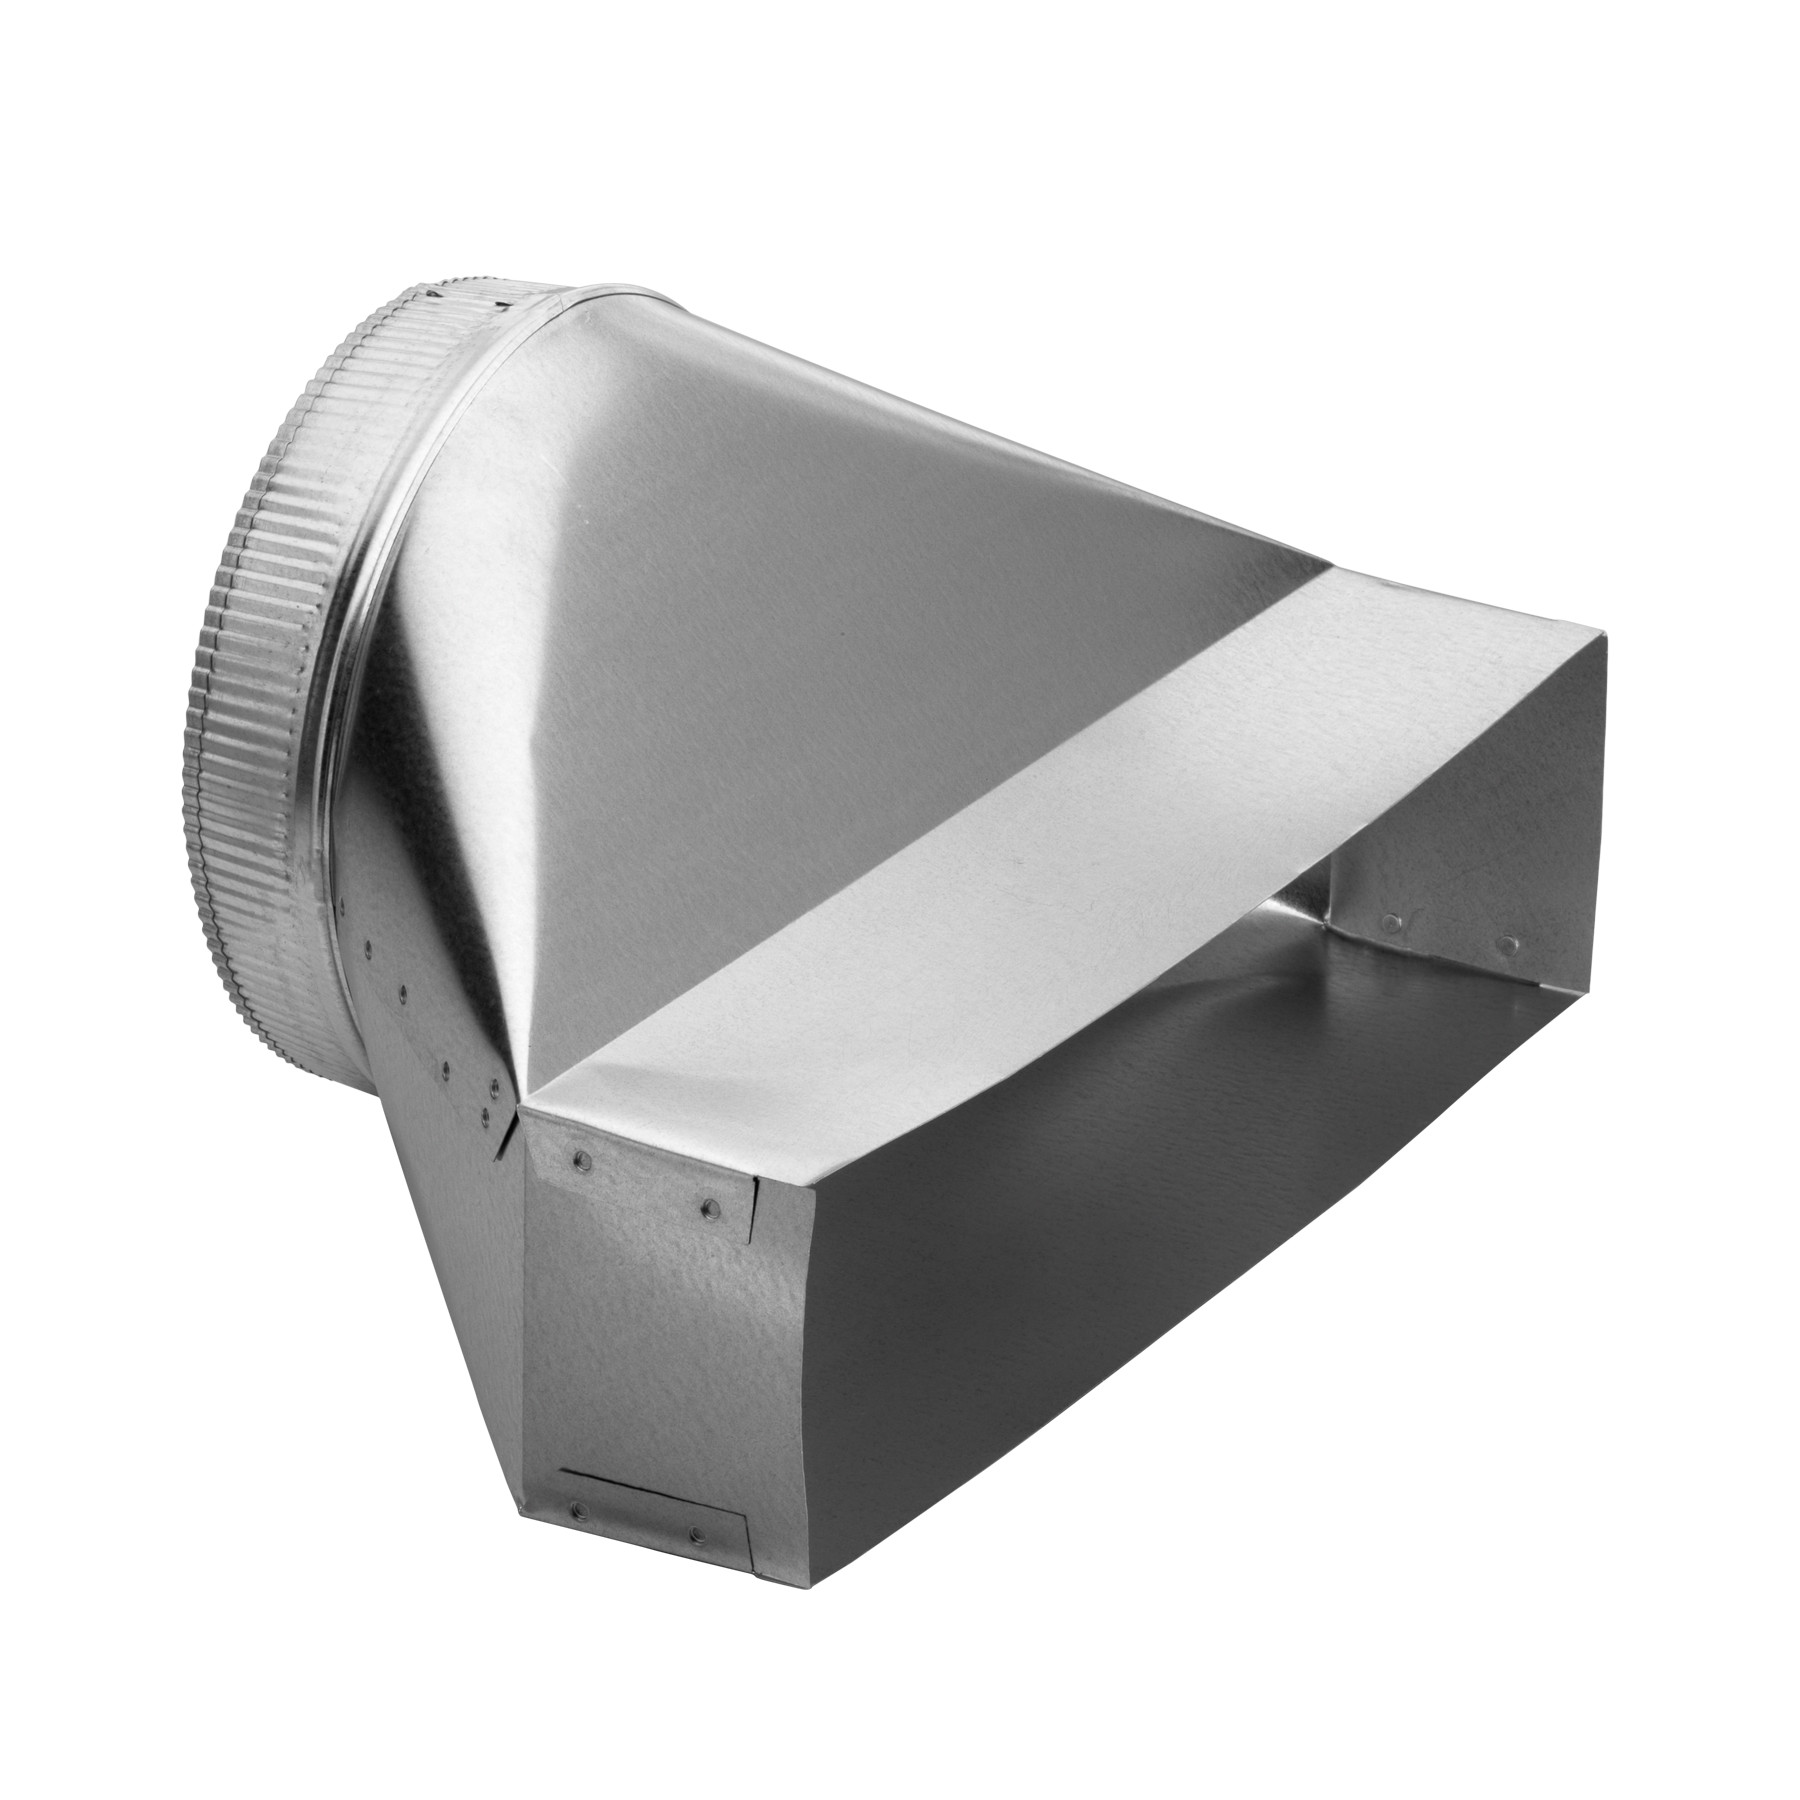 10-Inch Round to Rectangular Transition for Range Hoods and Bath Ventilation Fans